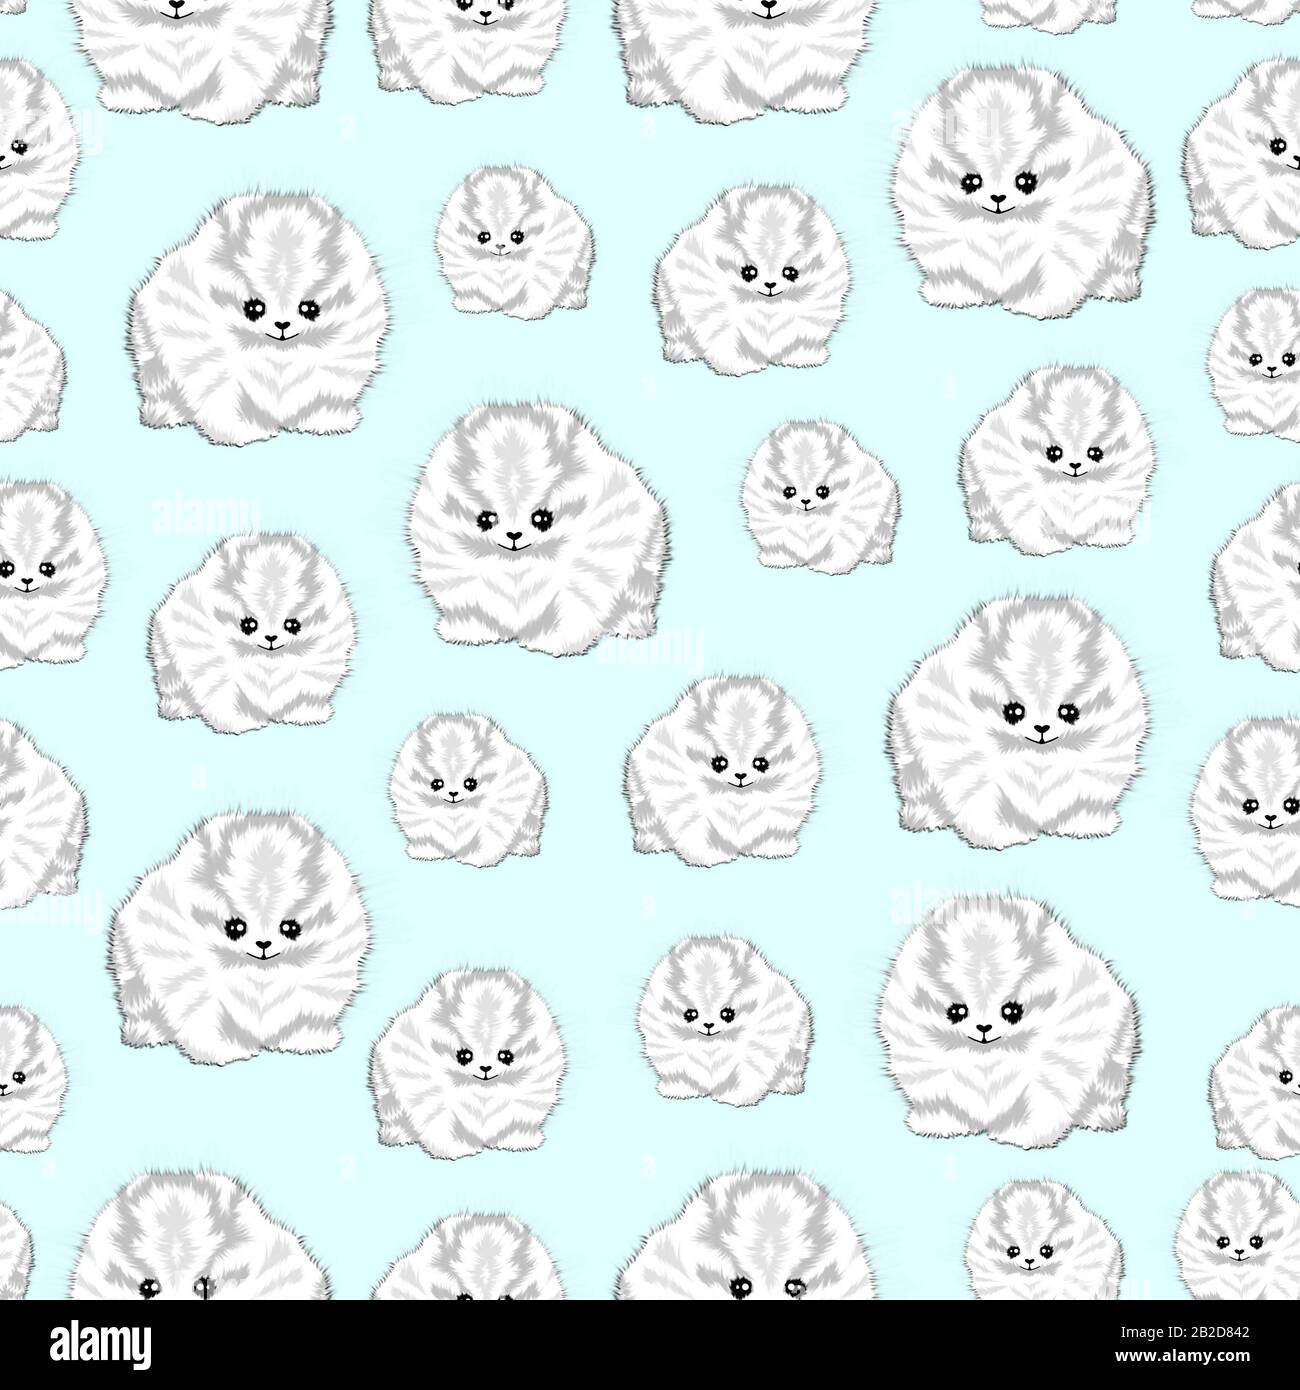 Seamless pattern with cute white dogs. Funny animals background. - illustration. Stock Photo